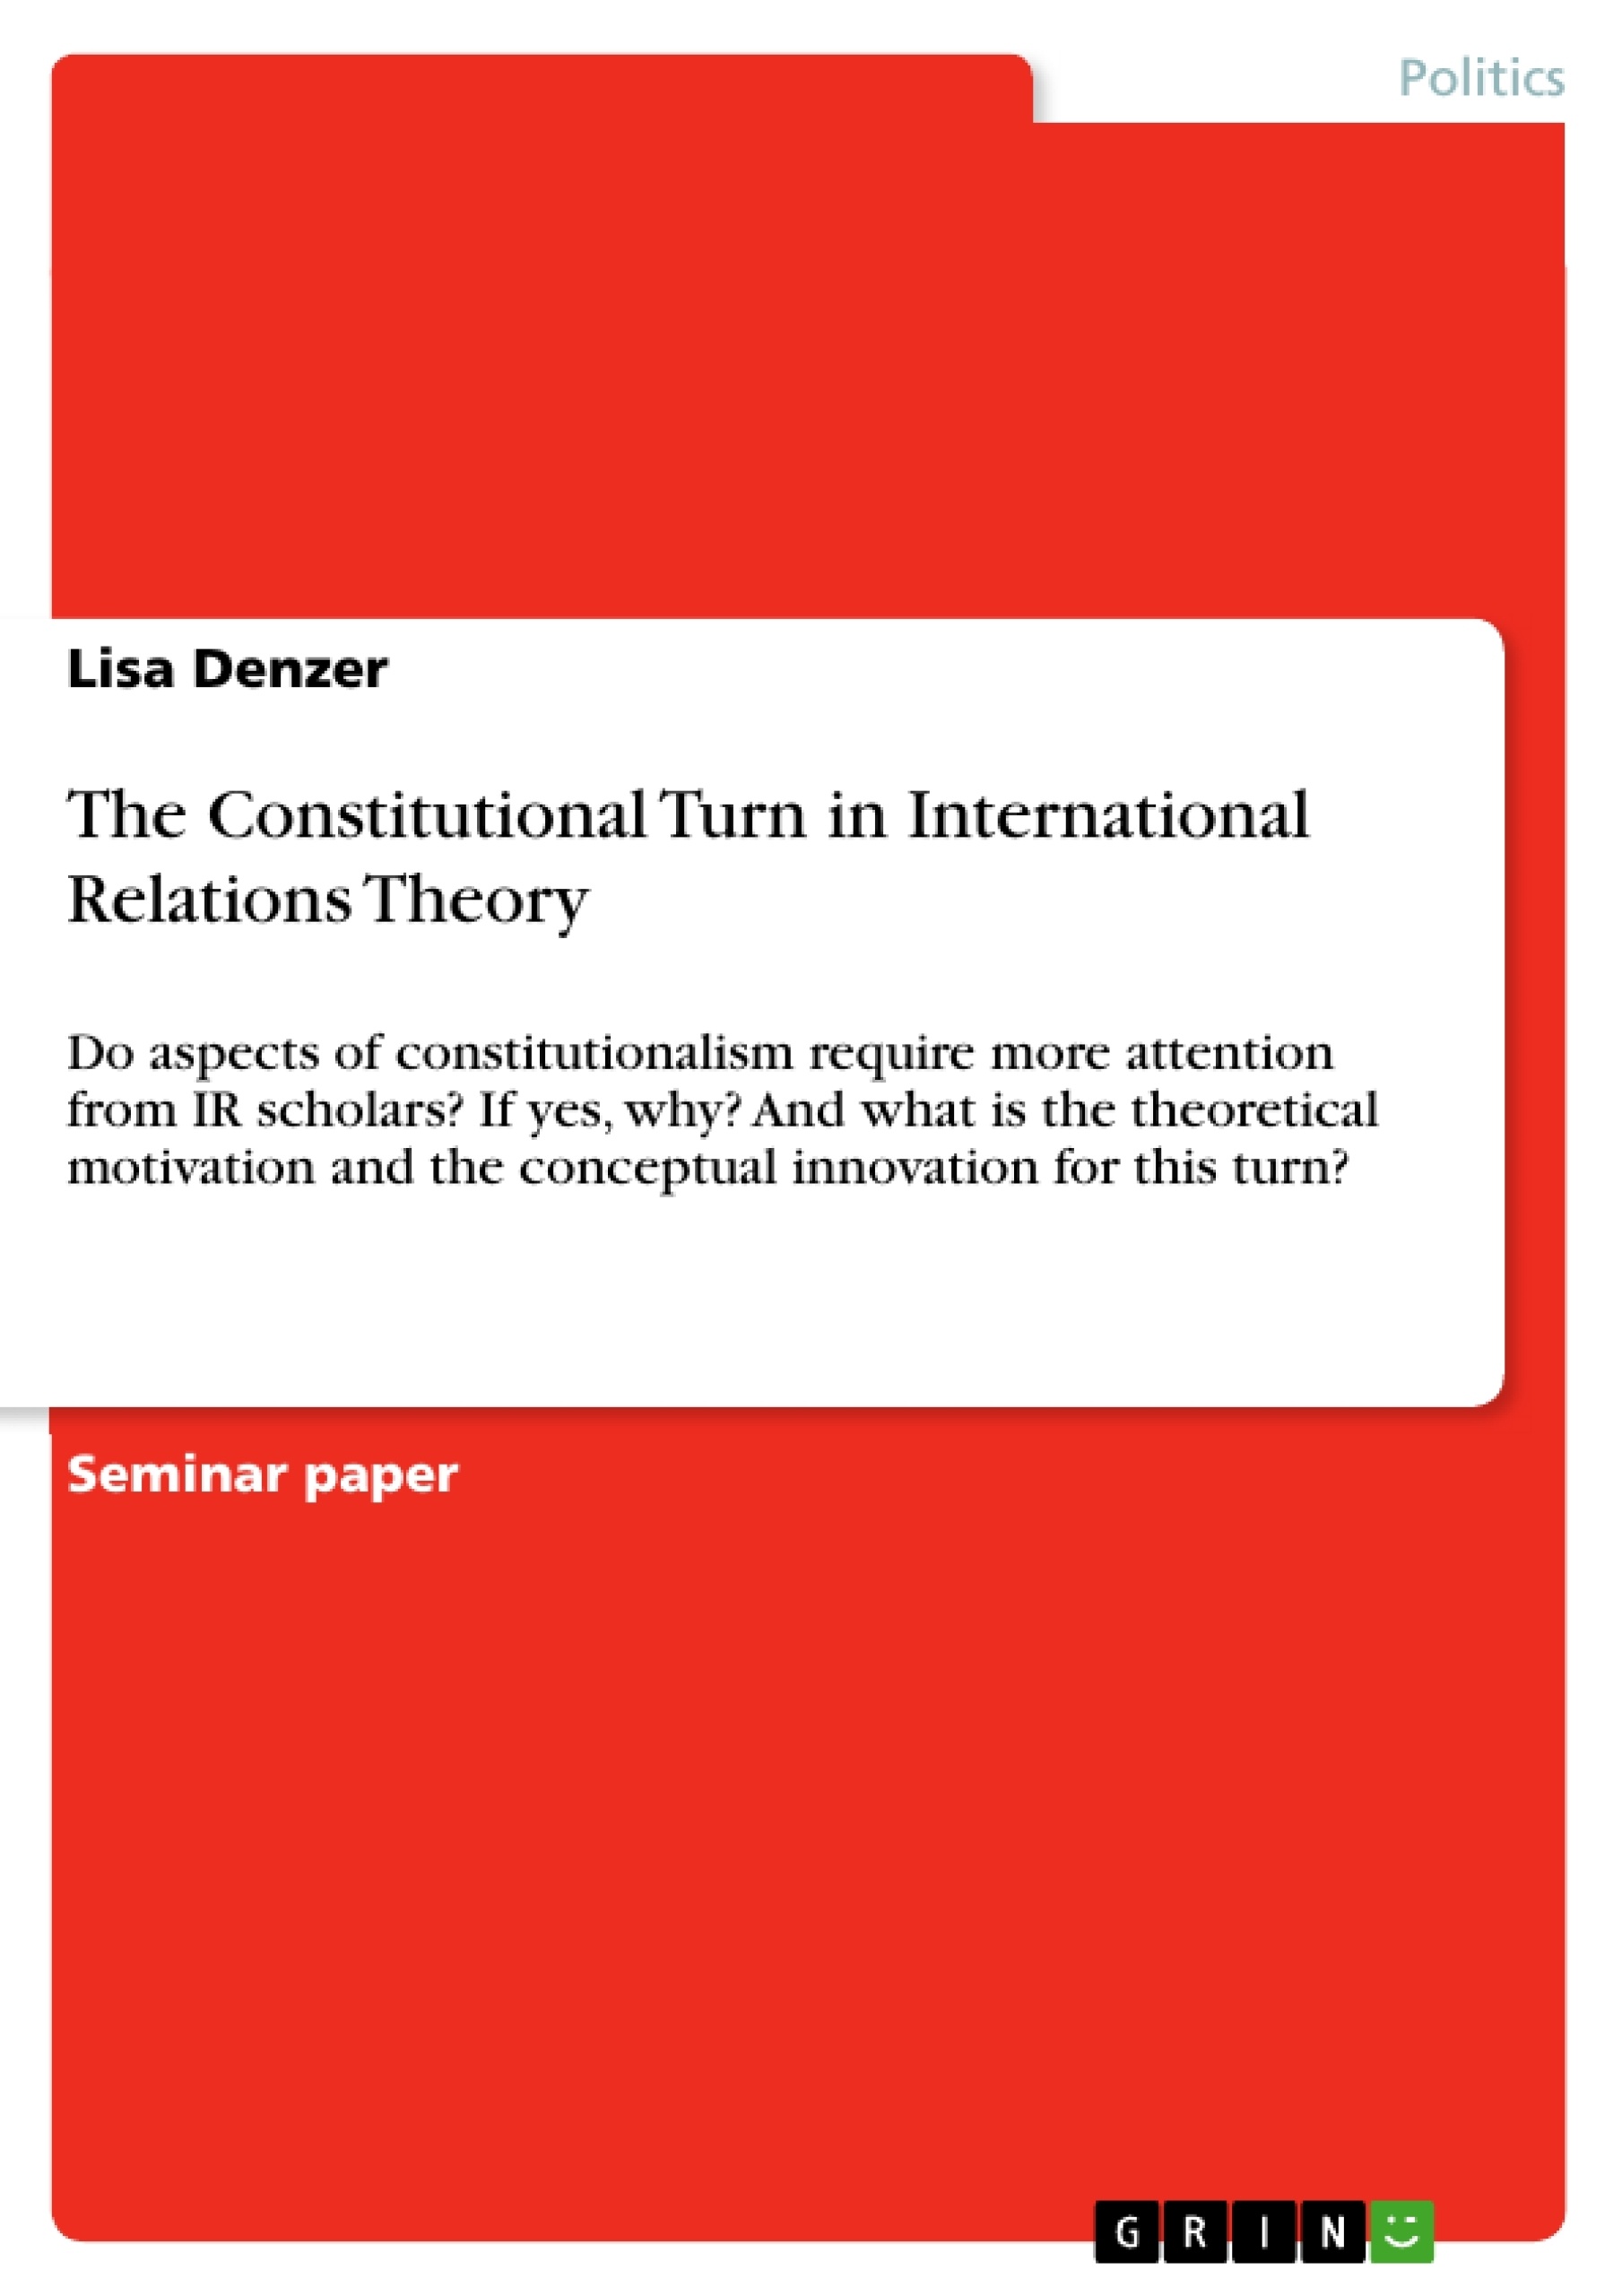 Titel: The Constitutional Turn in International Relations Theory 